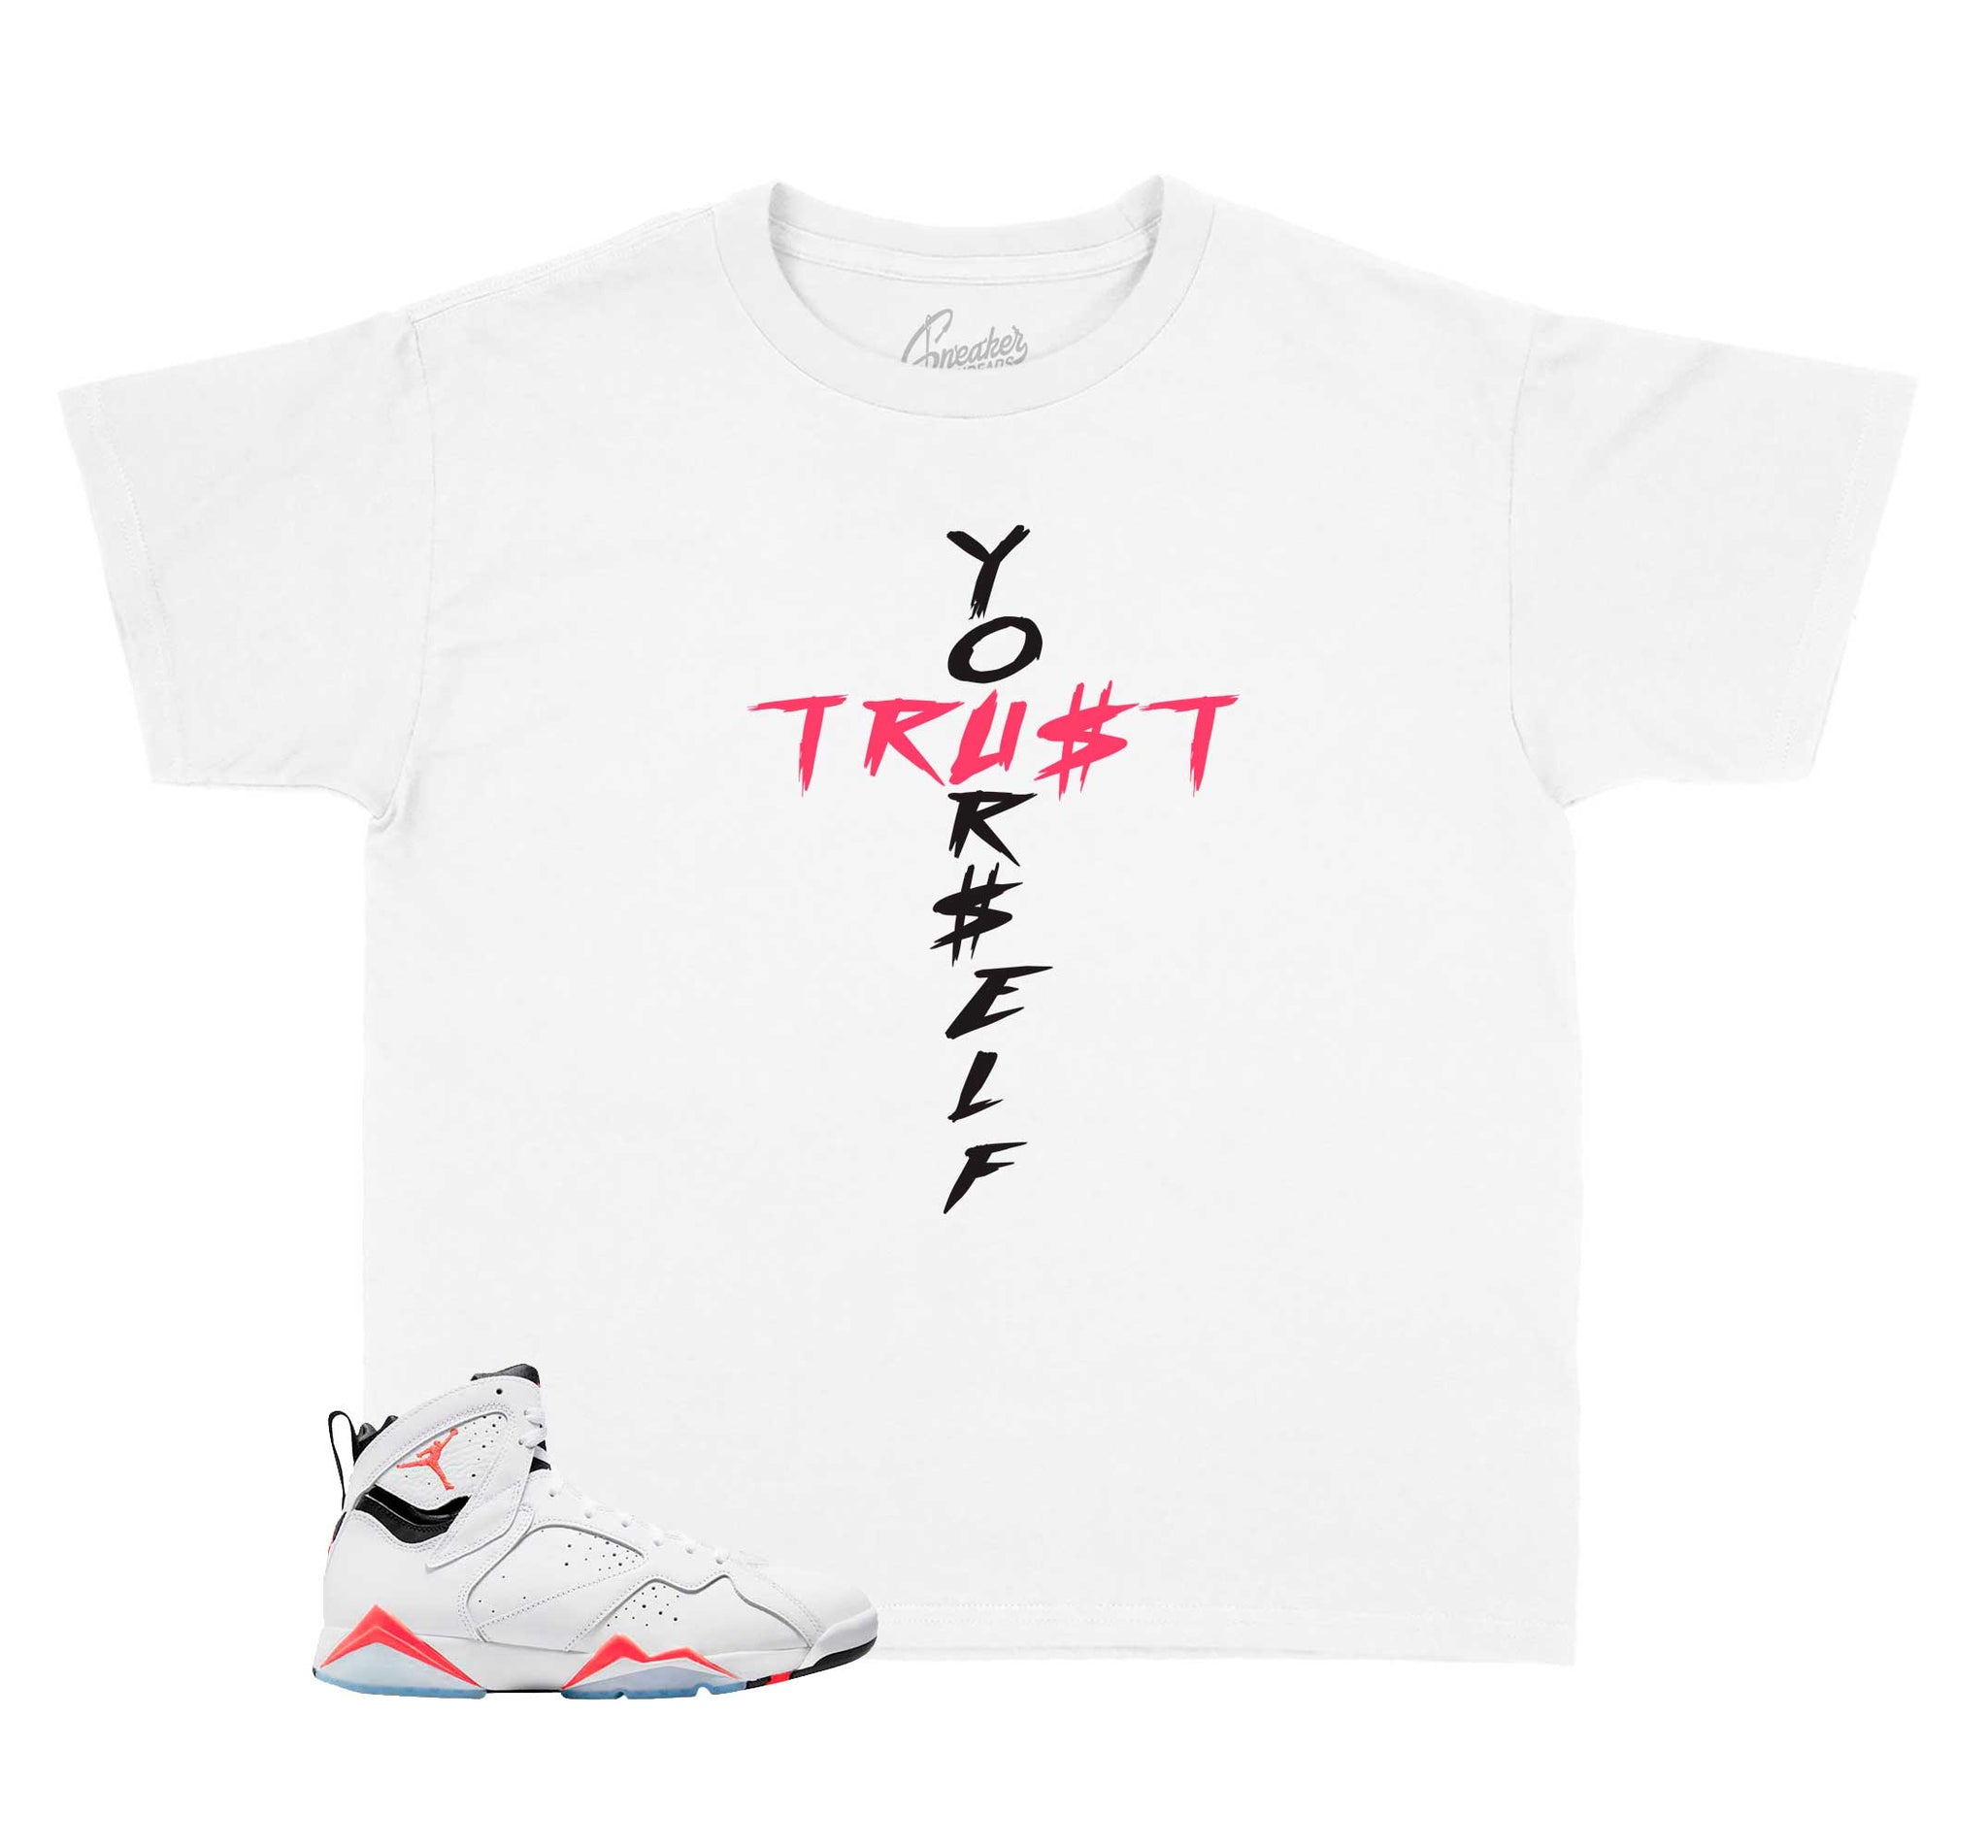 Kids Infrared 7 Shirt - Trust Yourself - White